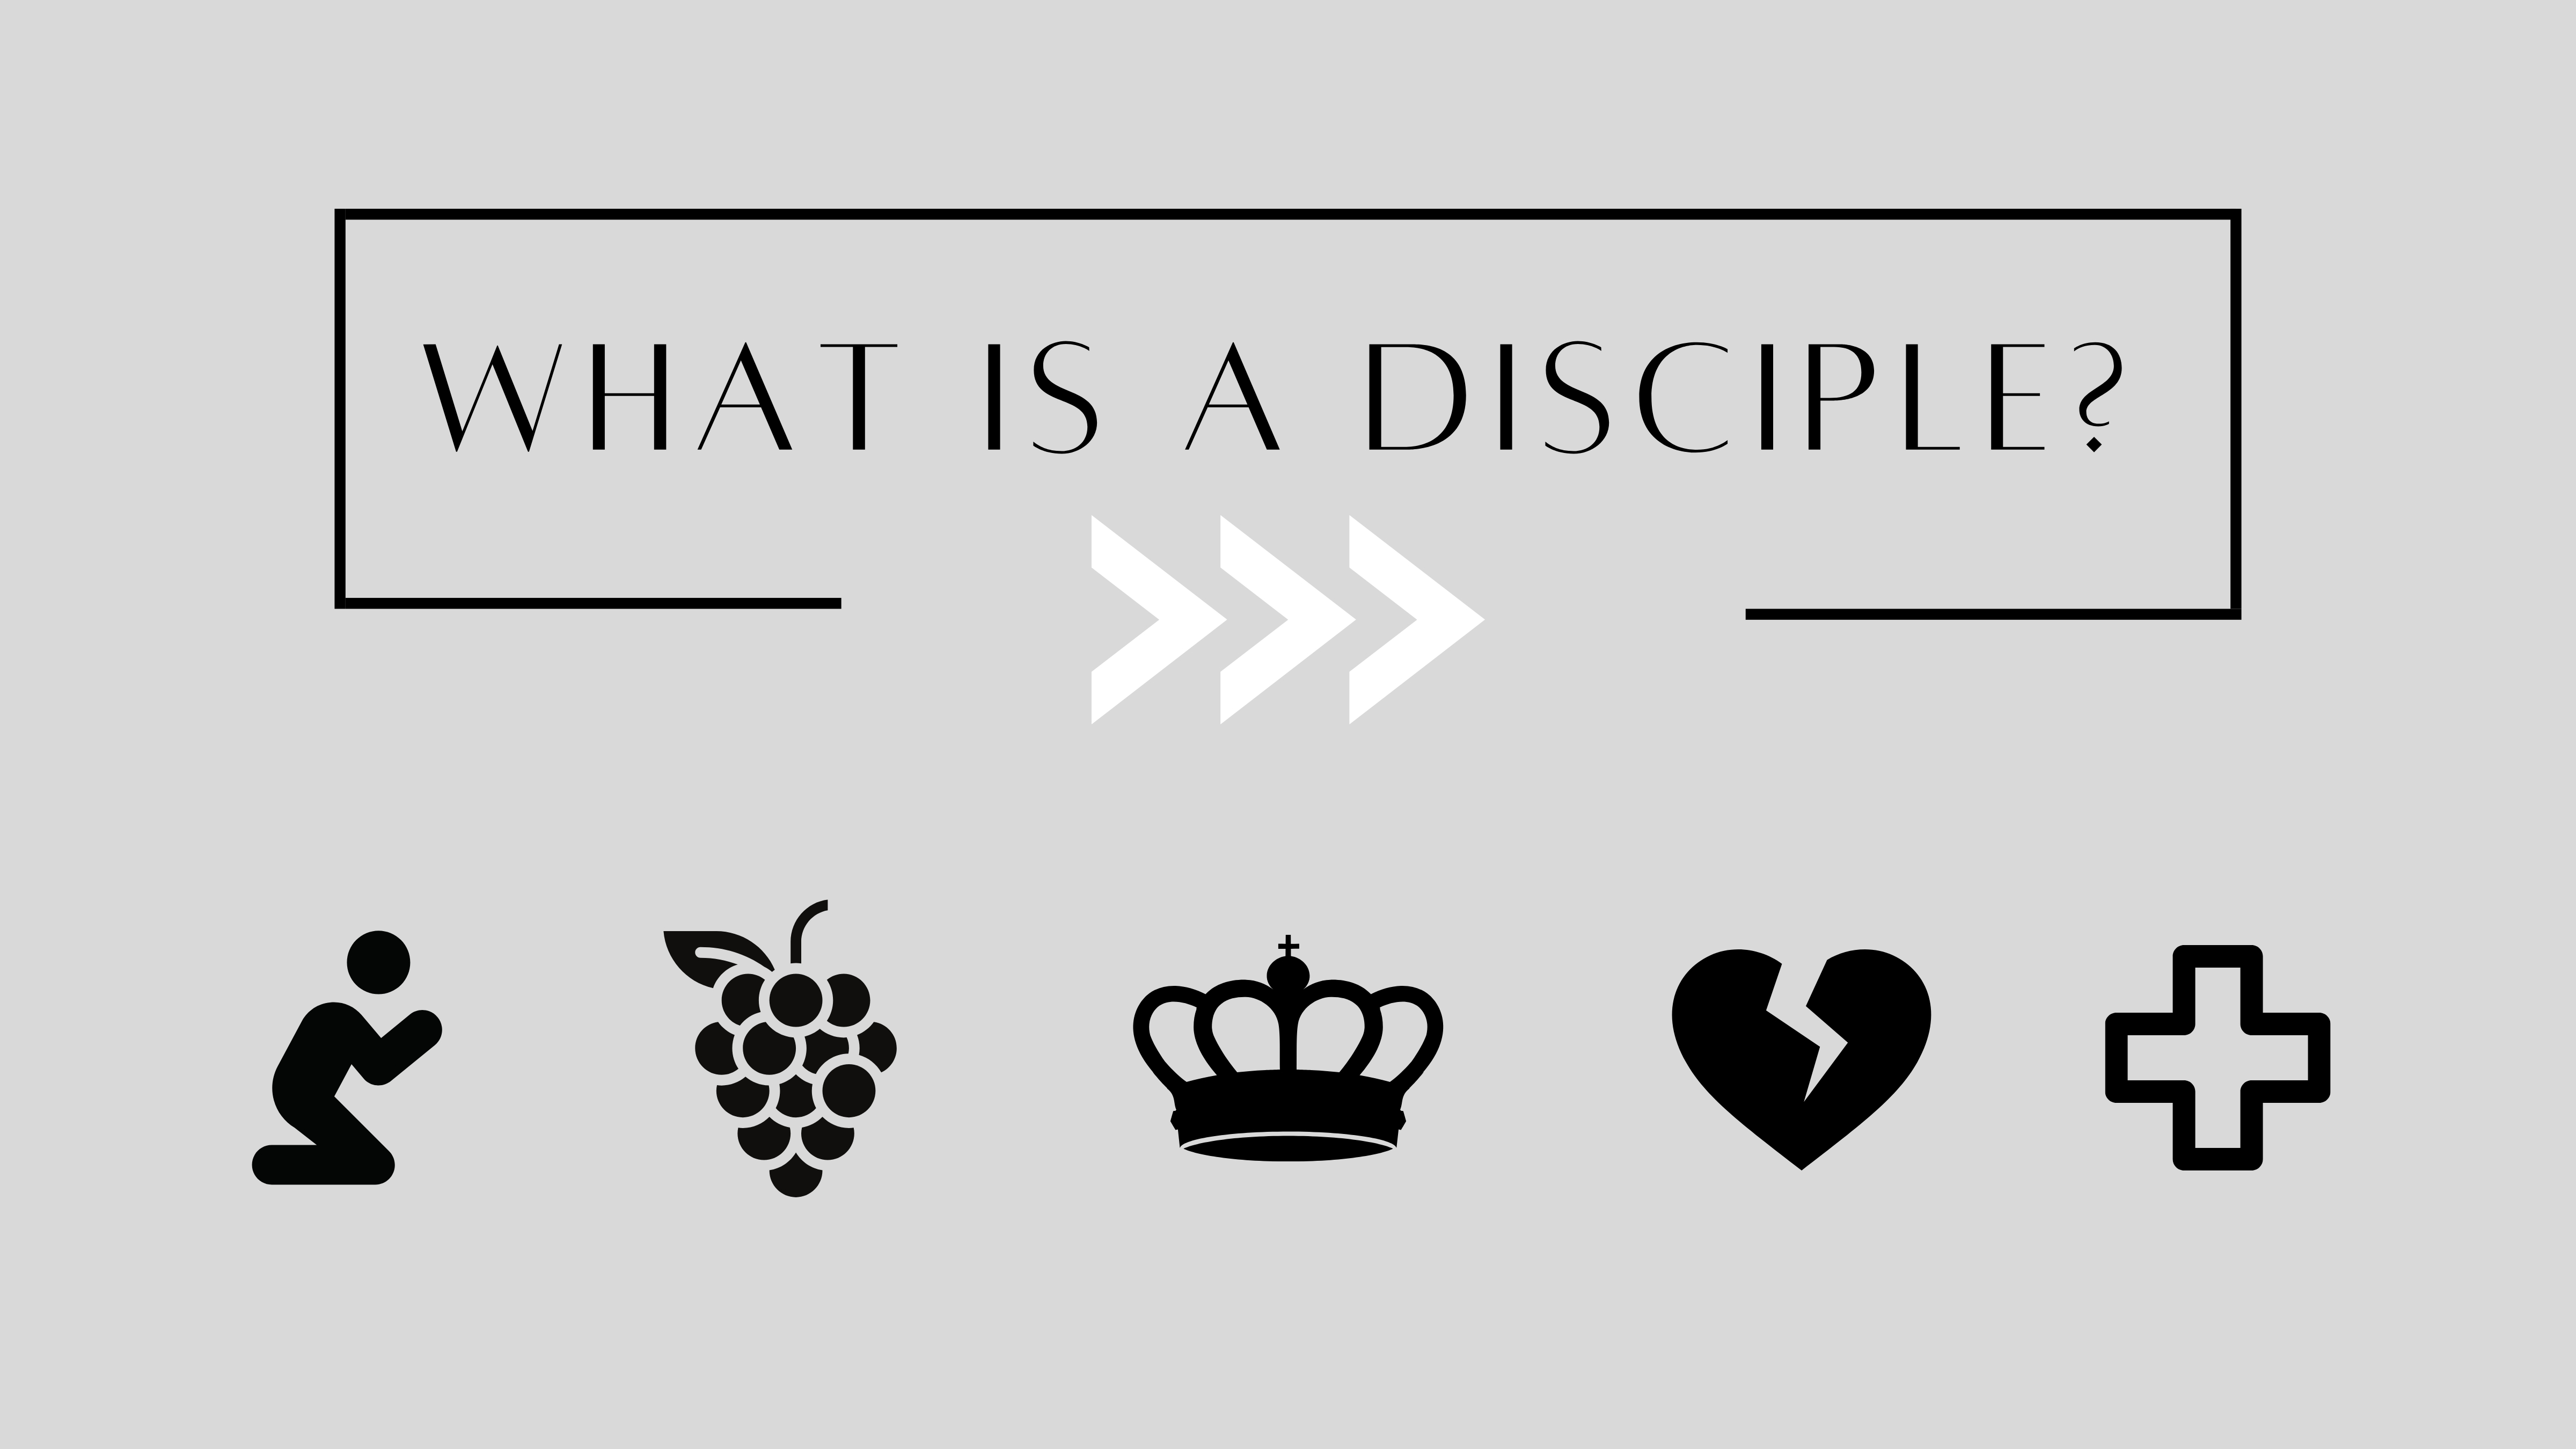 1150-what-is-a-disciple-slides-16726983728903.jpg